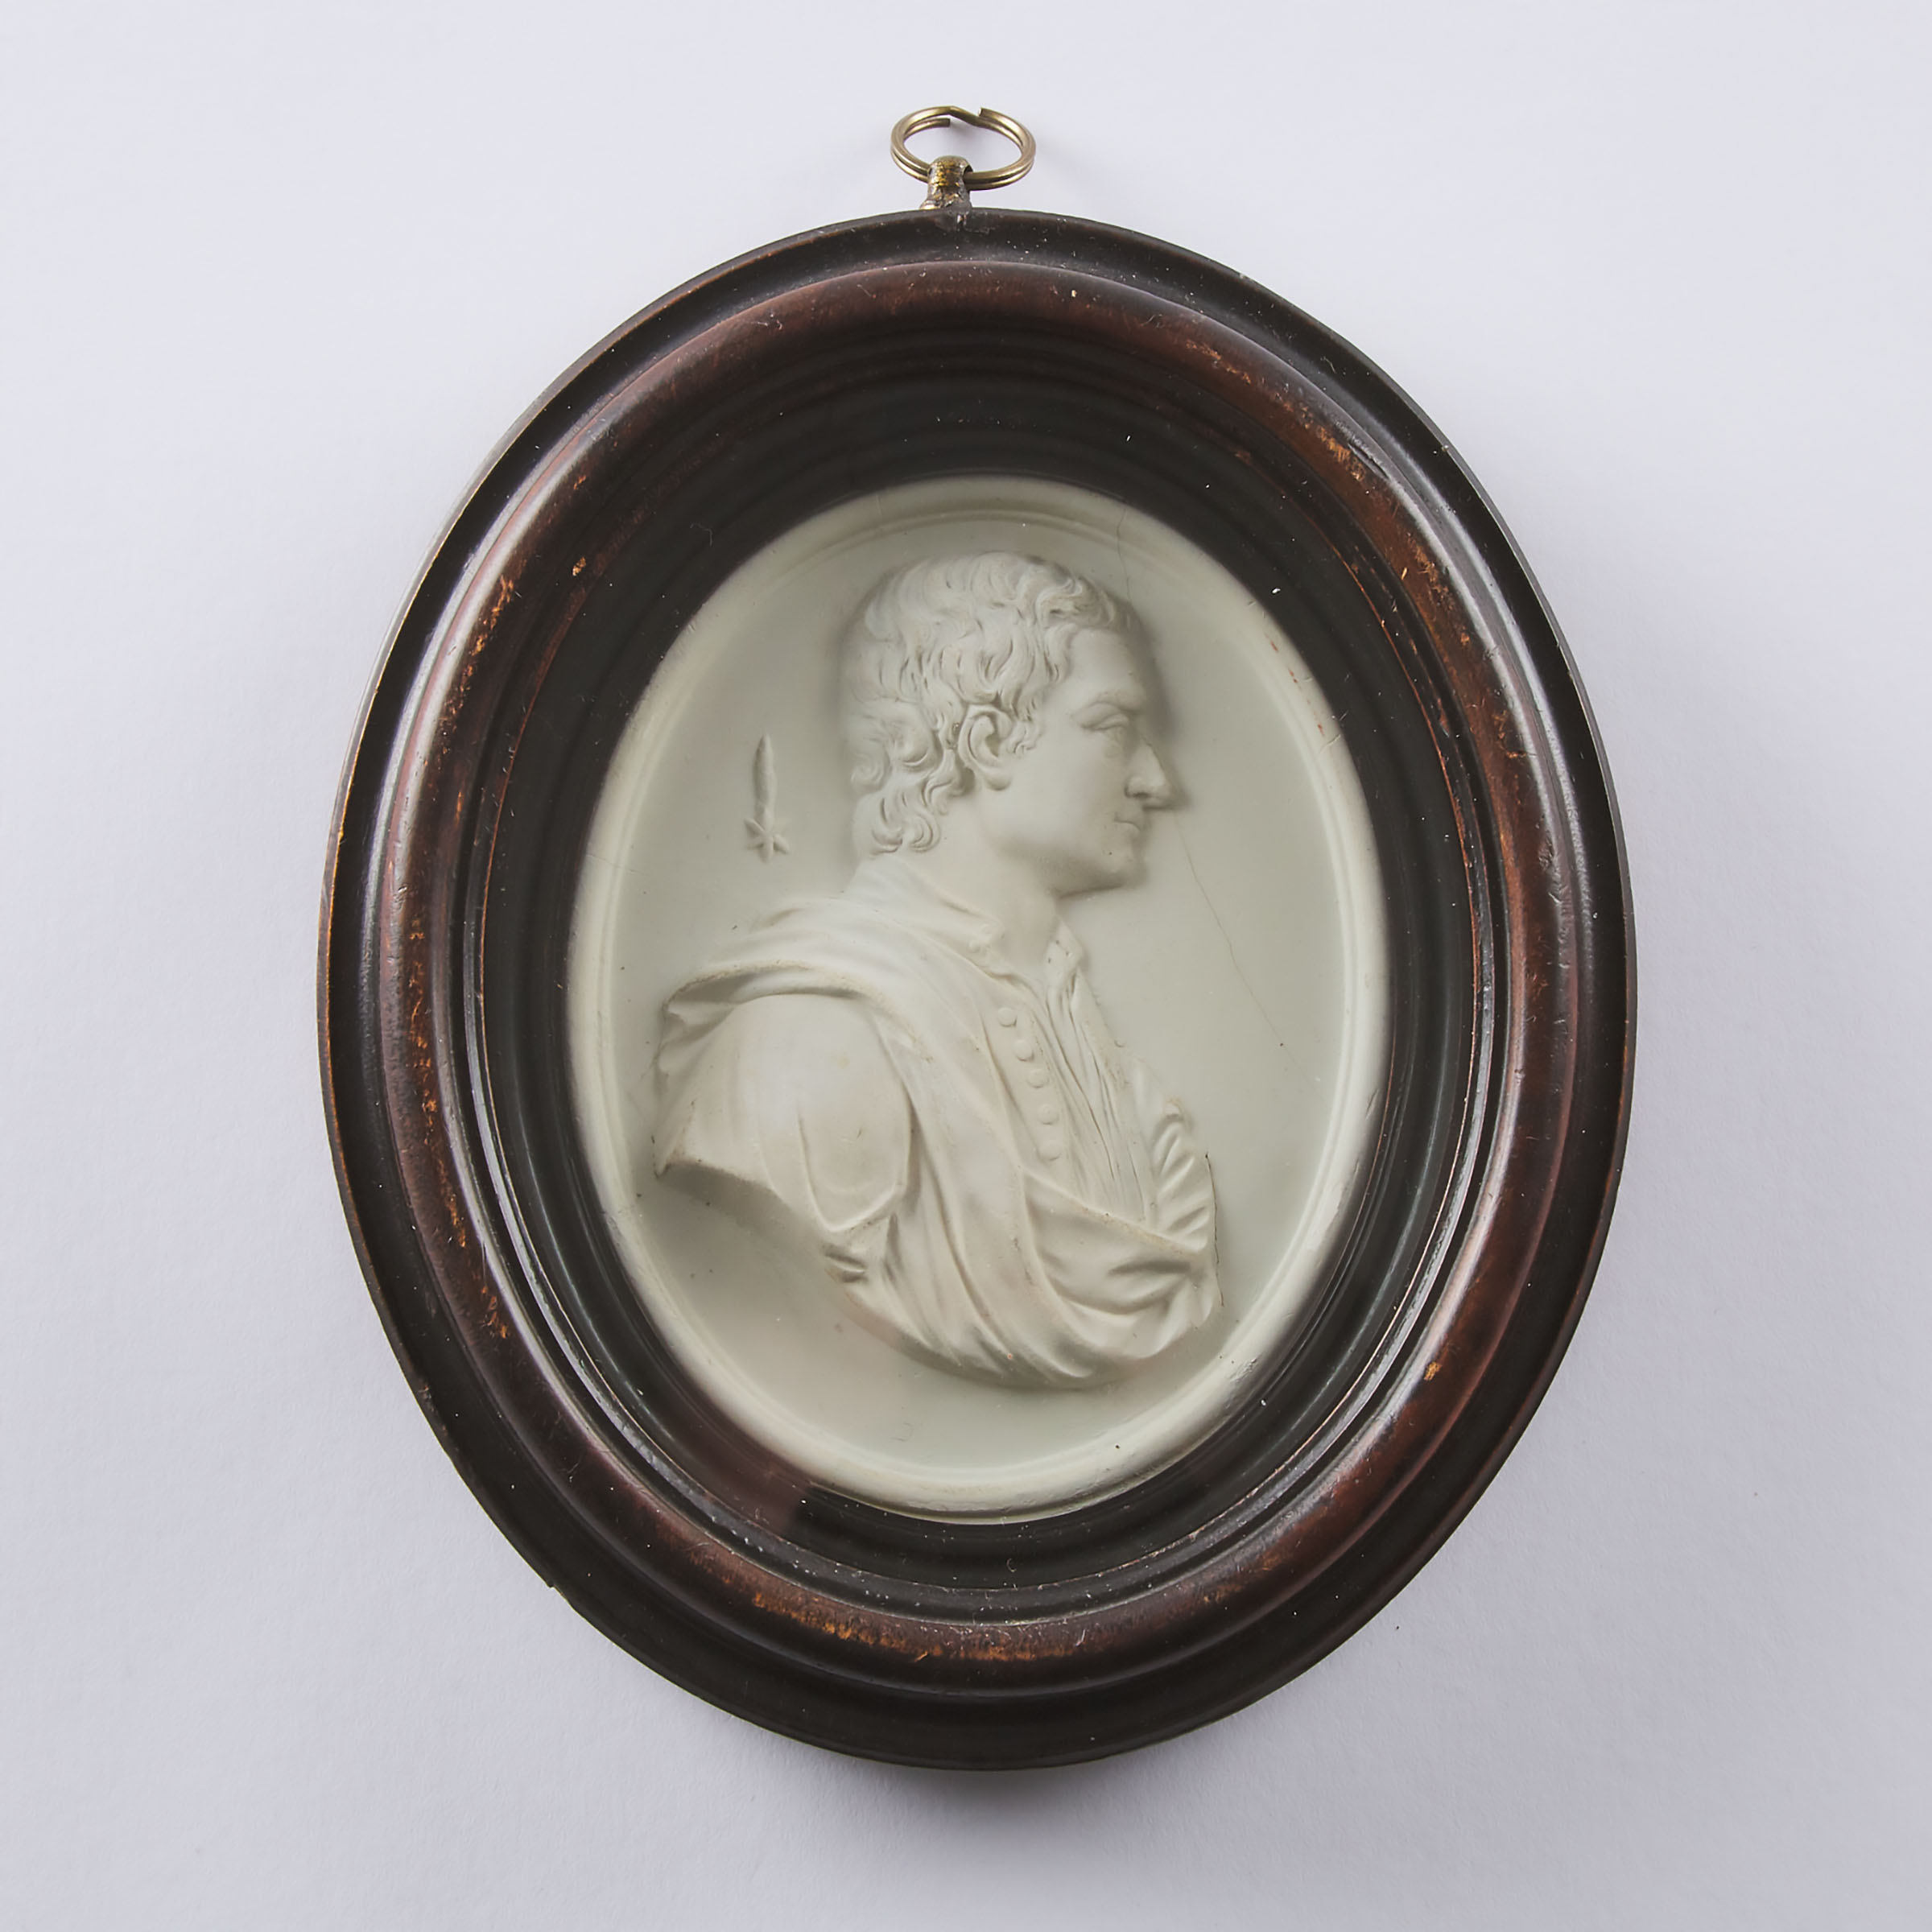 Plaster Relief Oval Profile Portrait Plaque of Sir Isaac Newton, 19th century